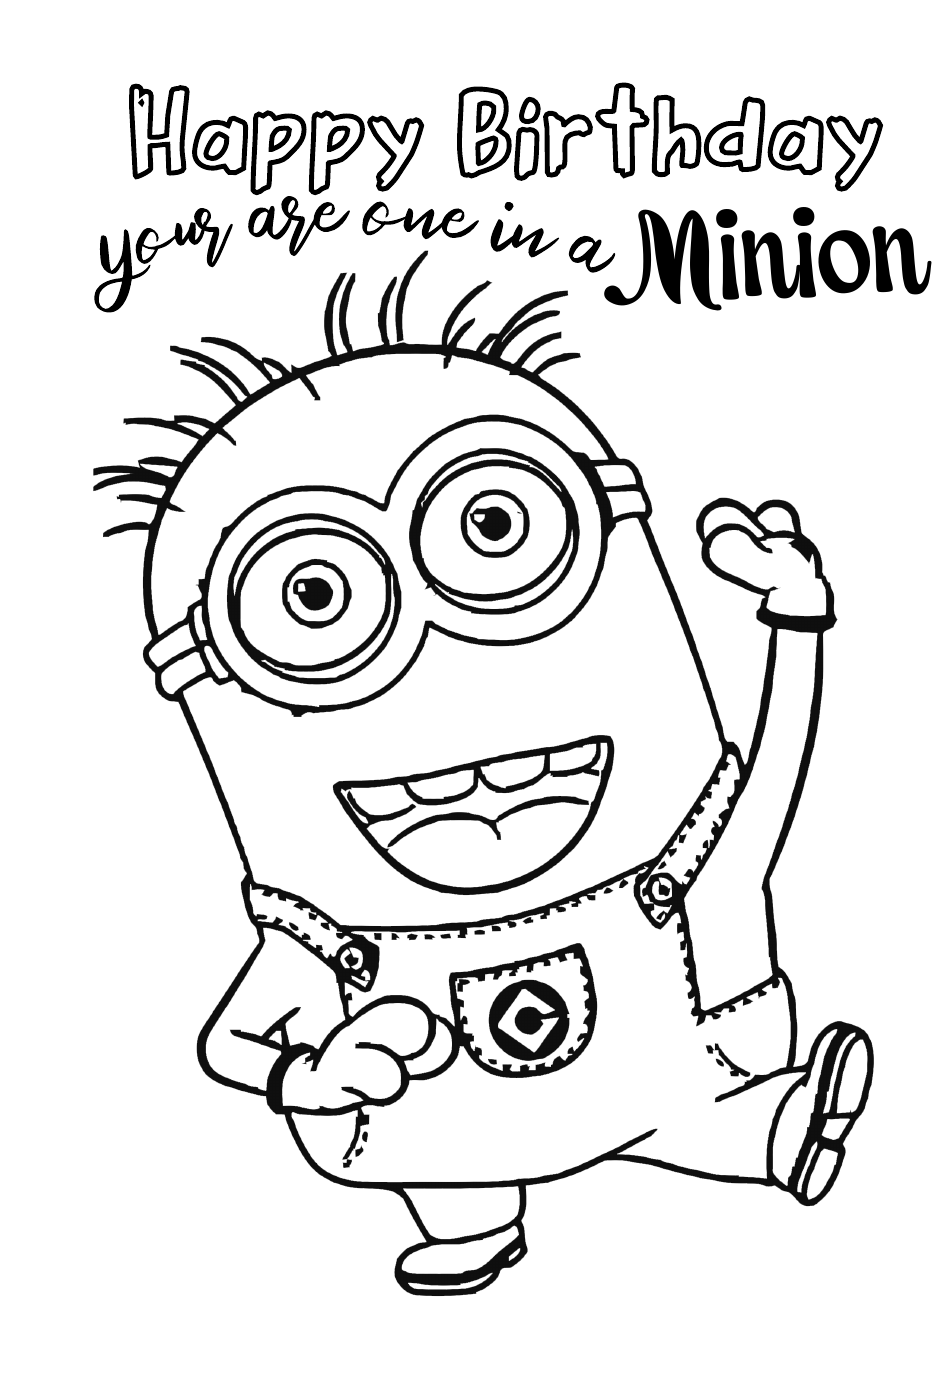 Birthday Coloring Page - Minion Download Printable PDF | Templateroller